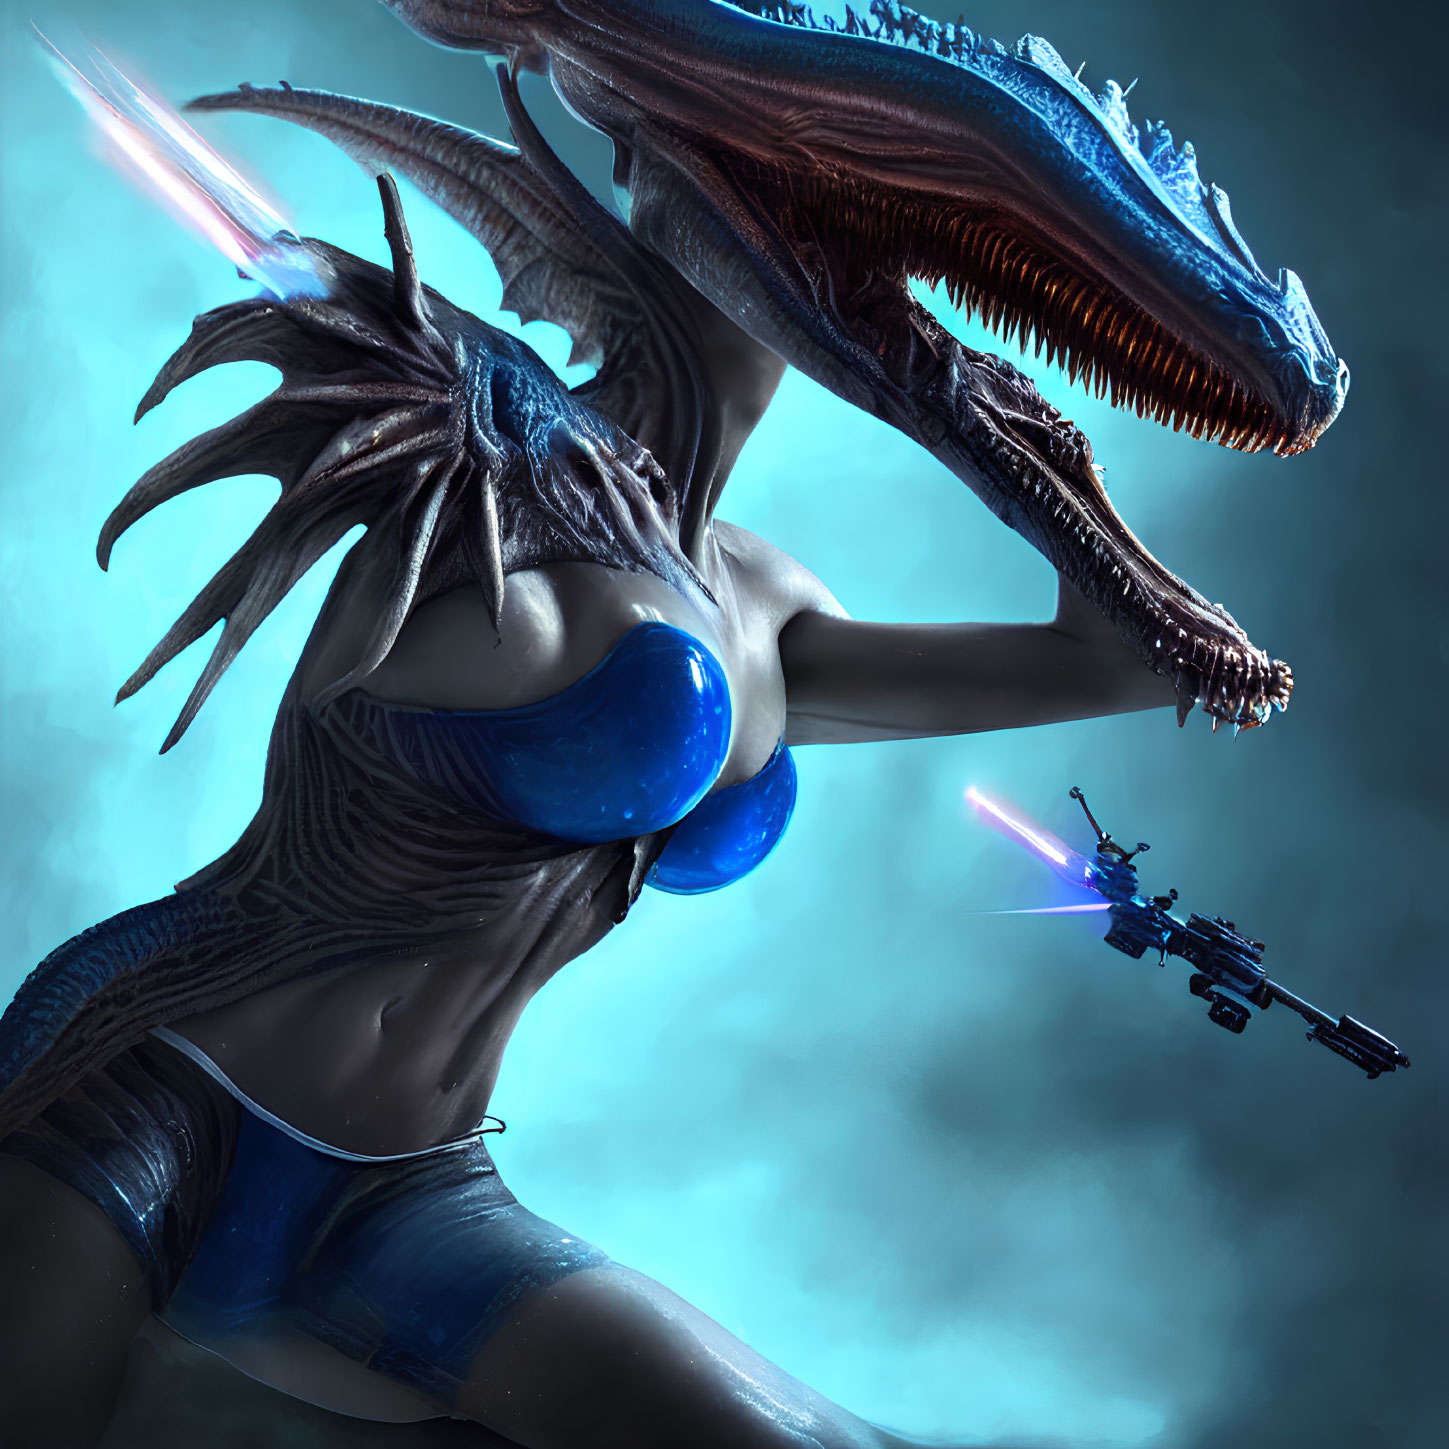 Futuristic warrior woman with dragon companion faces flying spacecraft in ethereal blue light